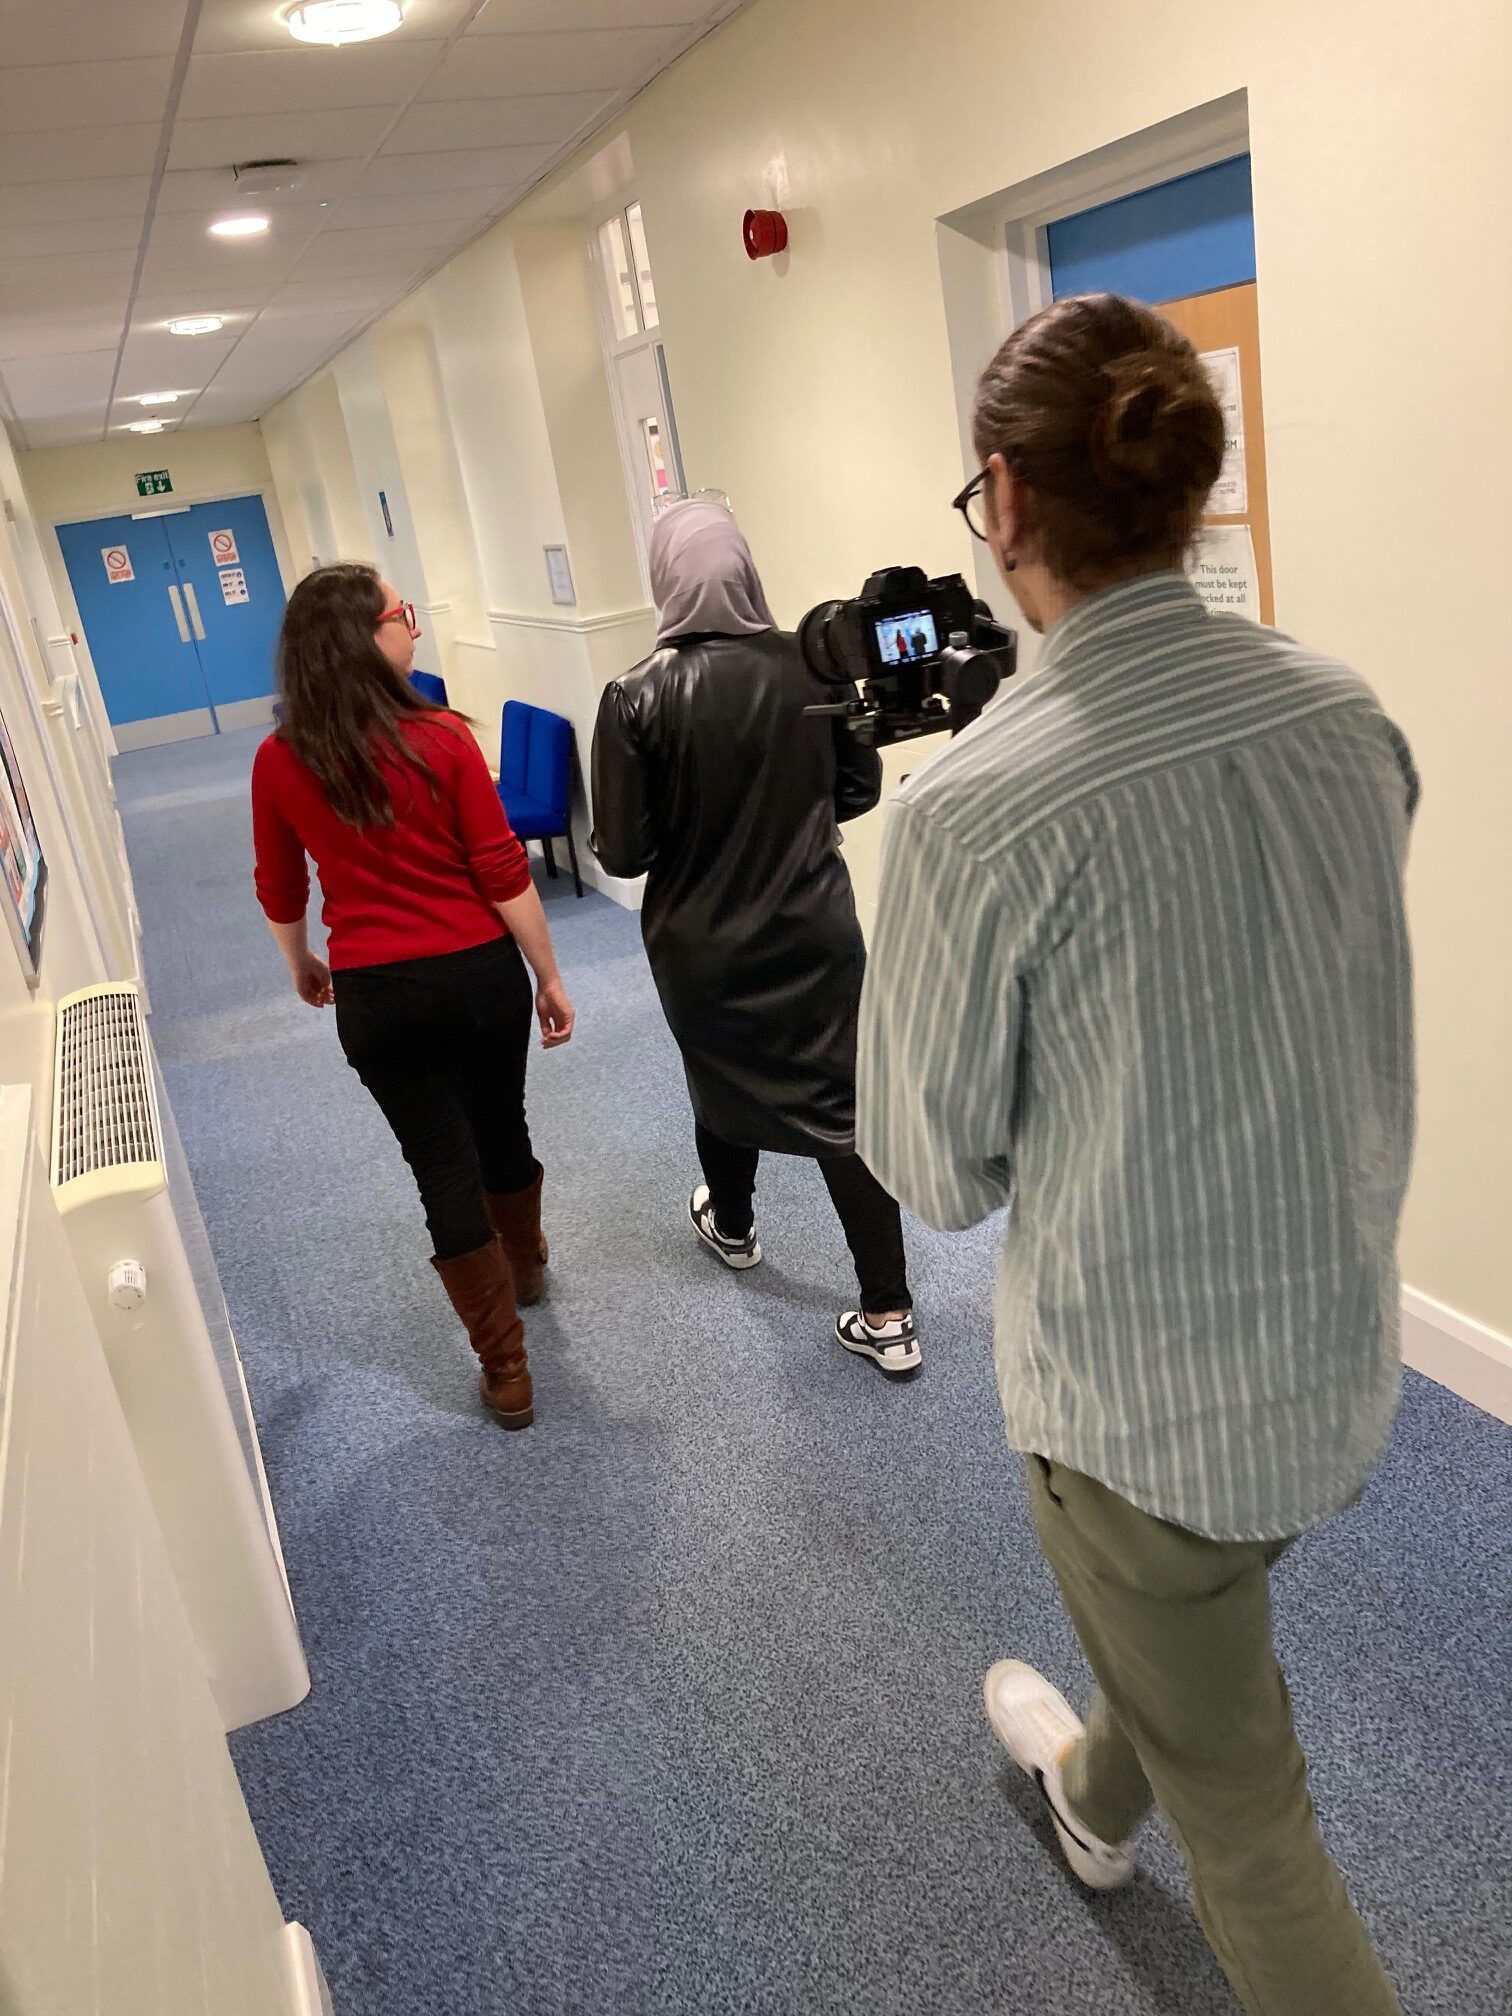 Behind the scenes of filming down a corridor for East Riding of Yorkshire Council